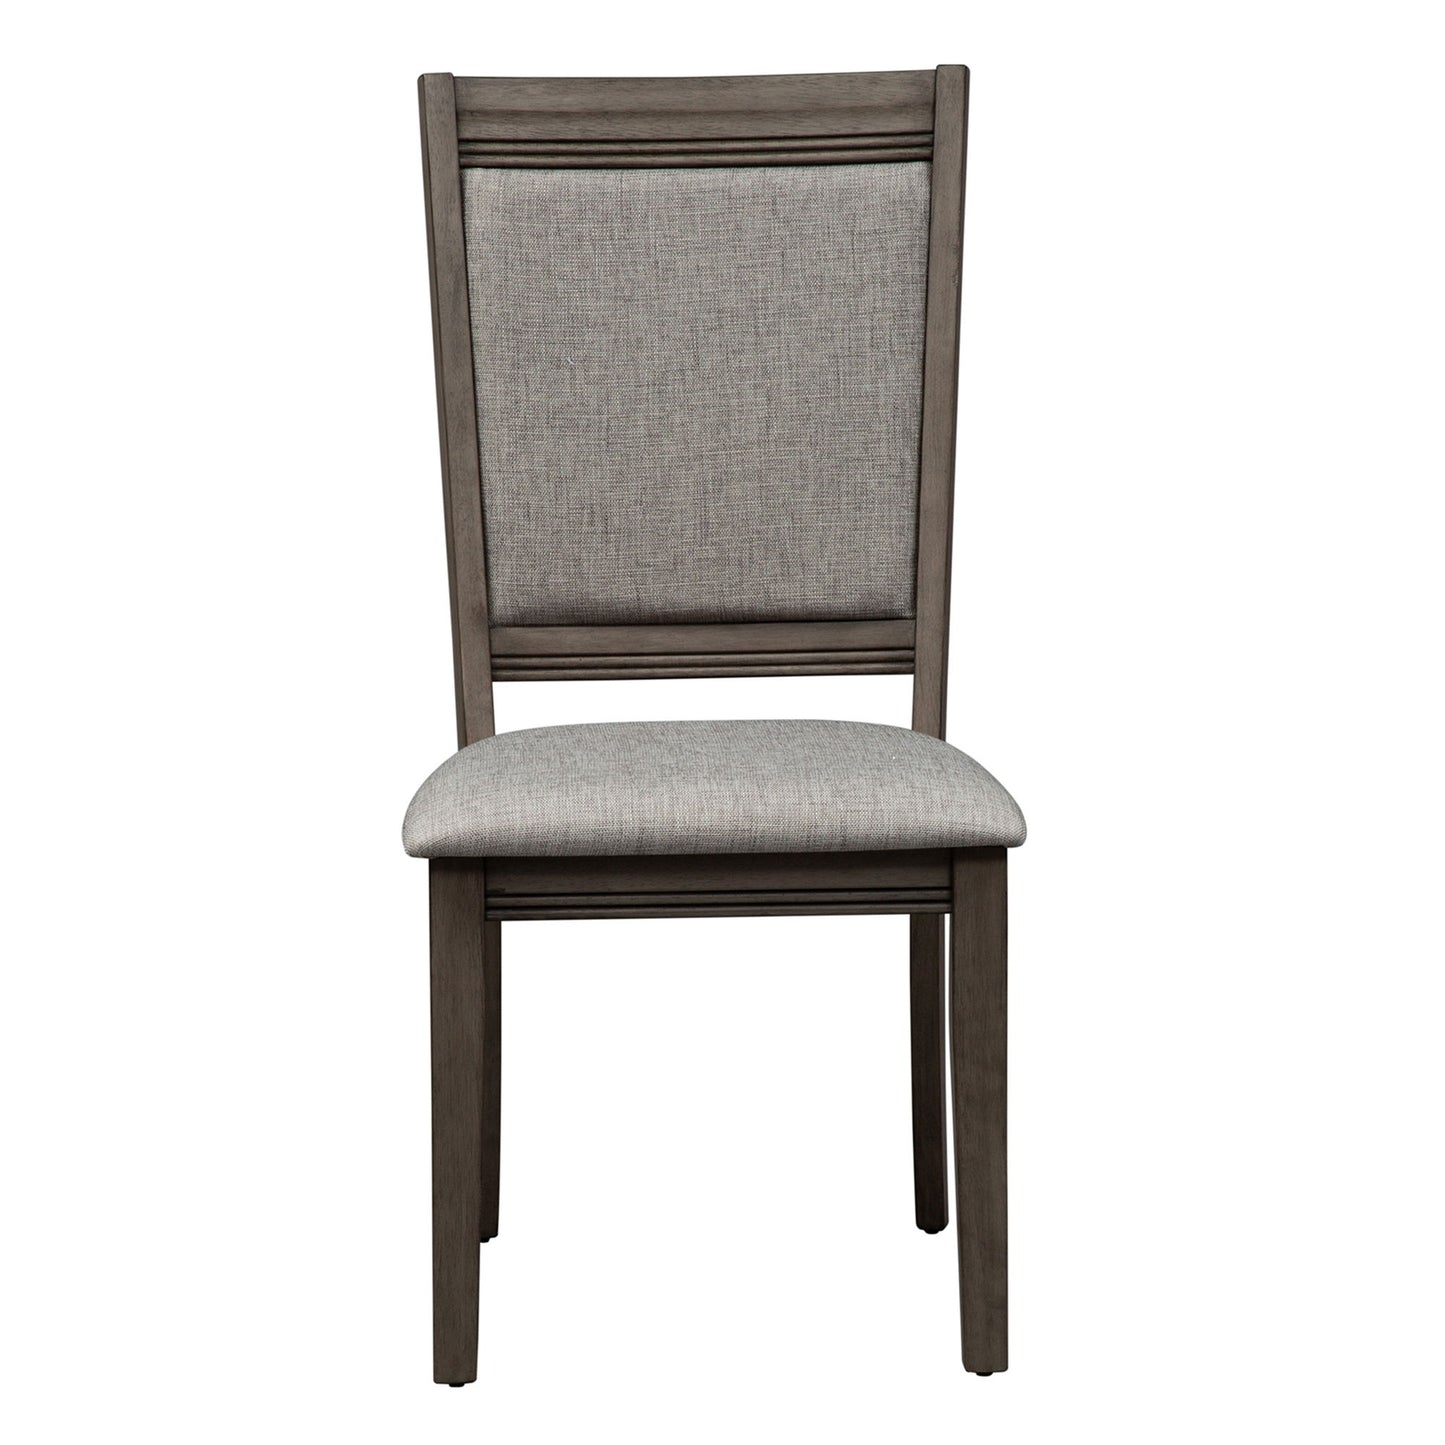 Tanners Creek - 5 Piece Leg Table Set (Upholstered Chair) - Dark Gray